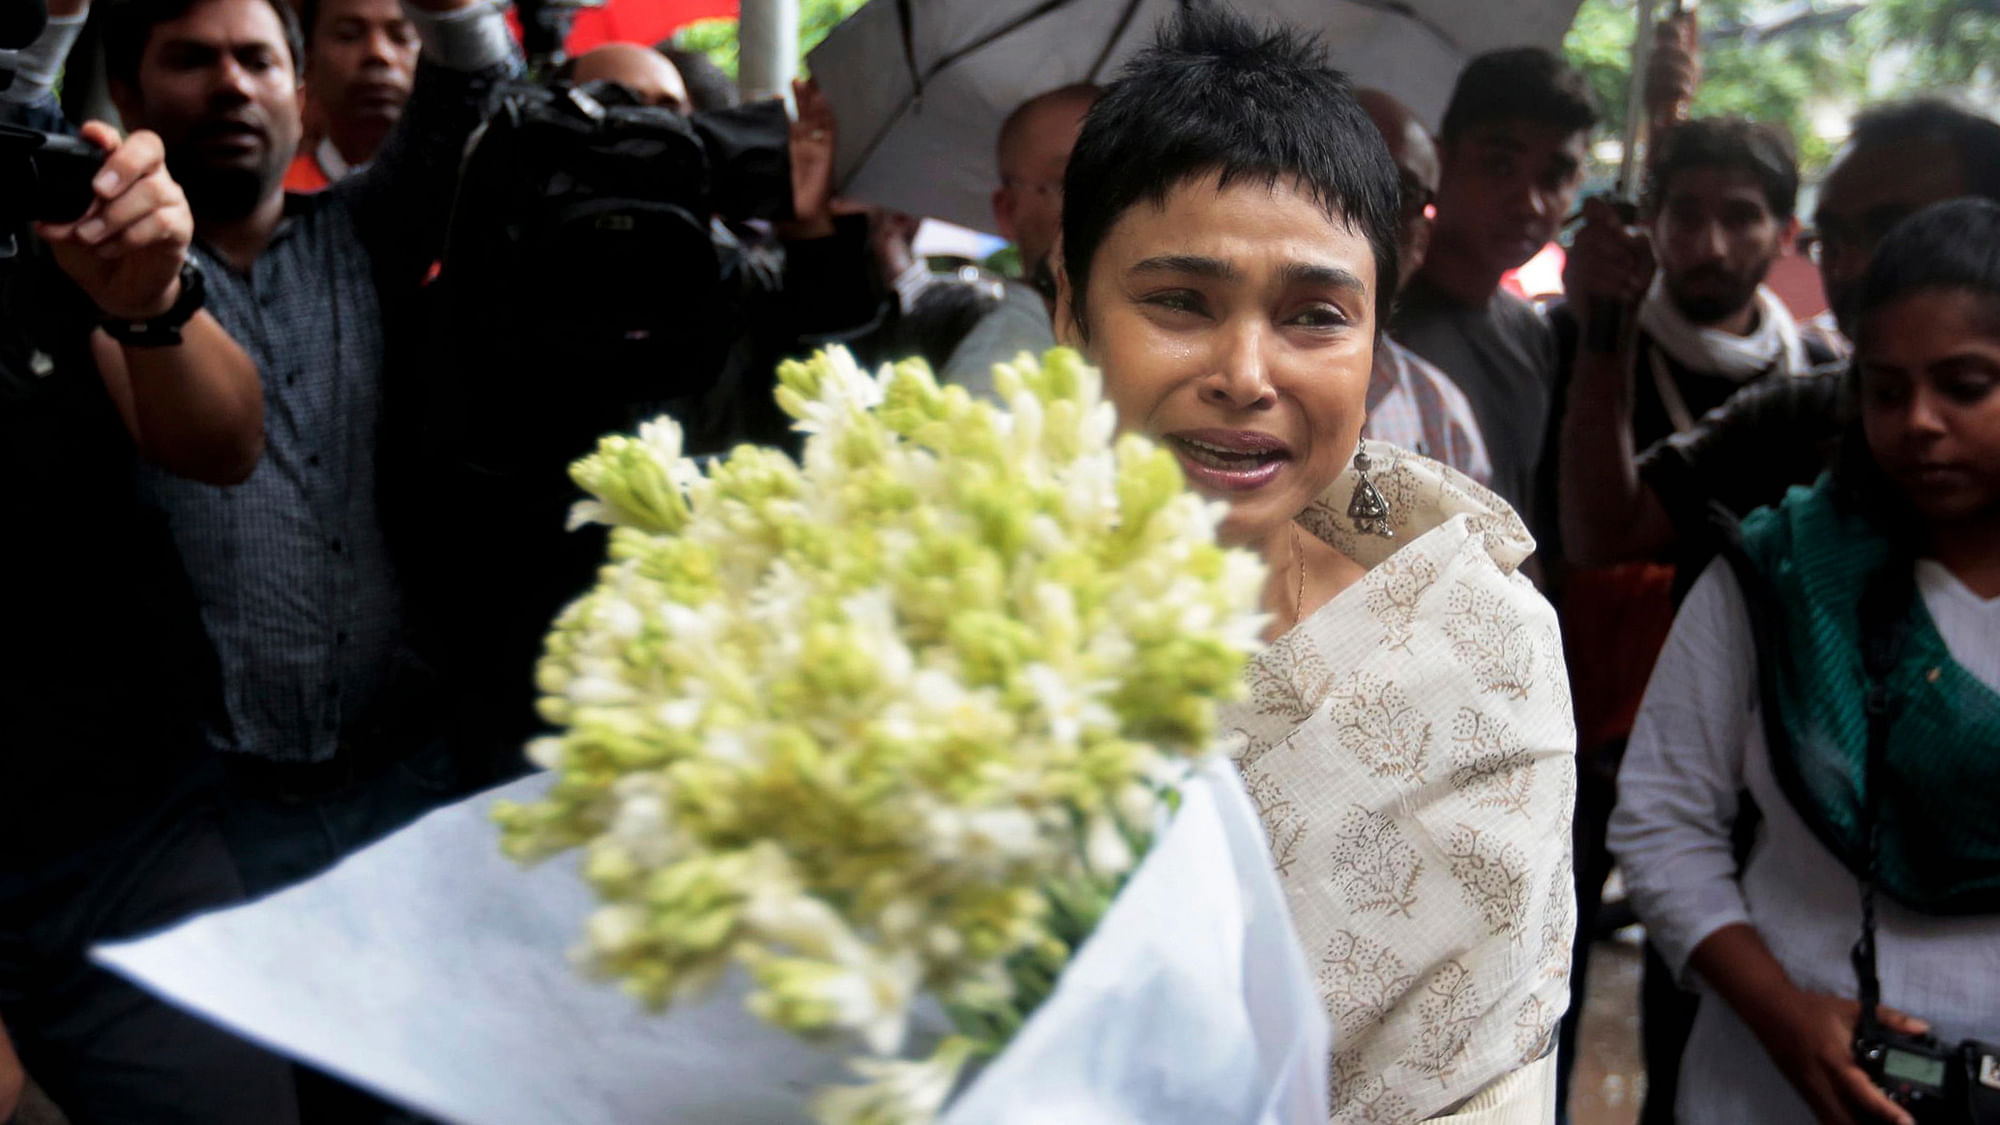 An unidentified woman cries as she brings flowers to pay respect to the victims of the attack. (Photo: AP)